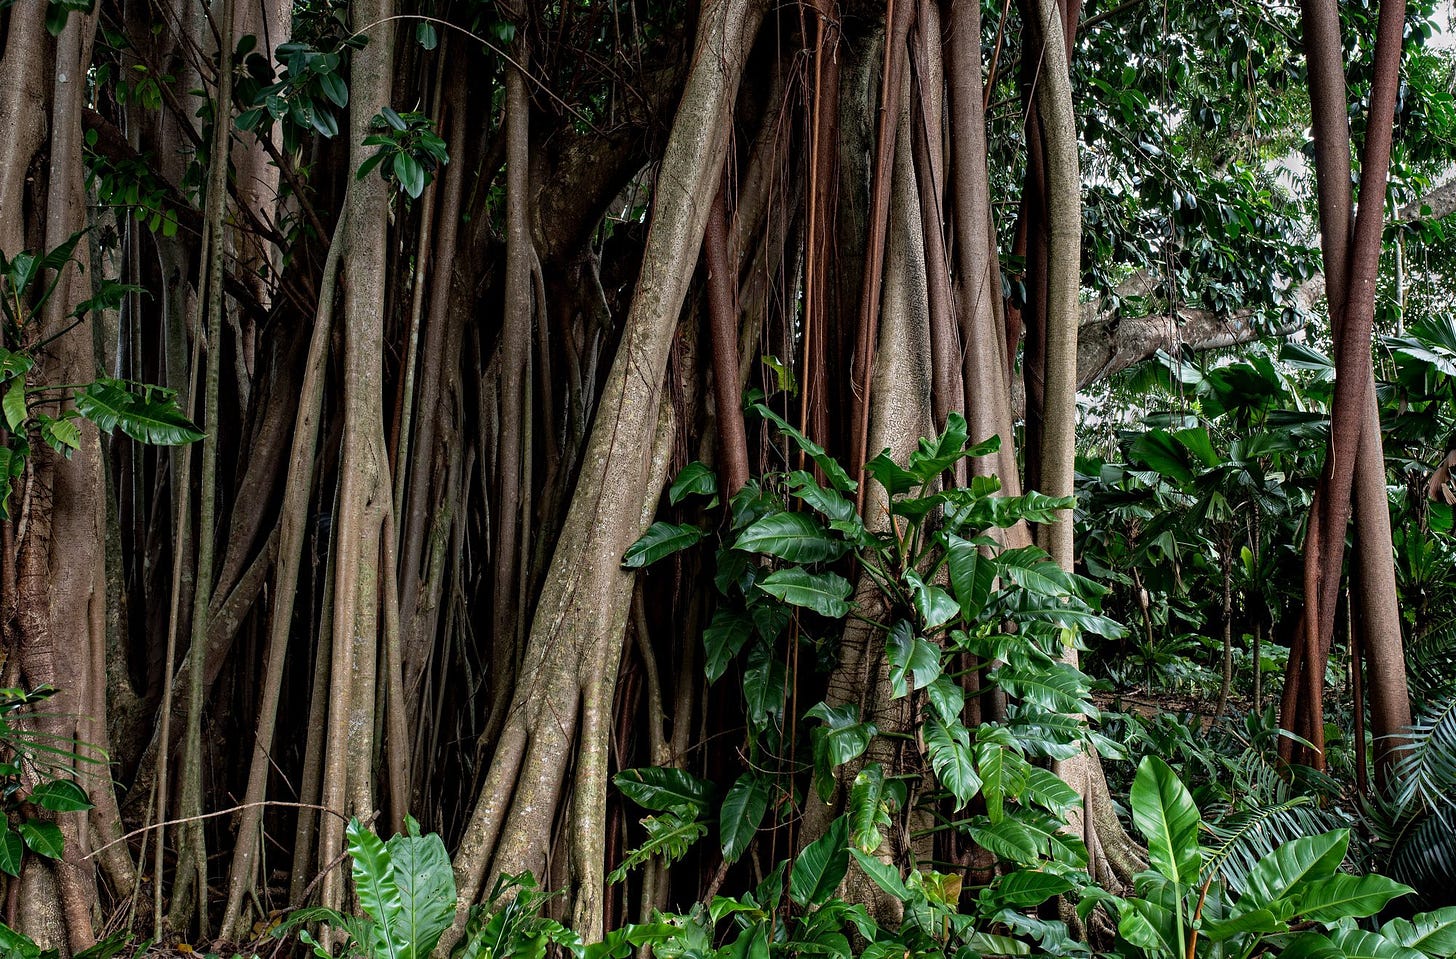 A Philodendron climbs up the trunks of a Rubber tree, Ficus elastica.